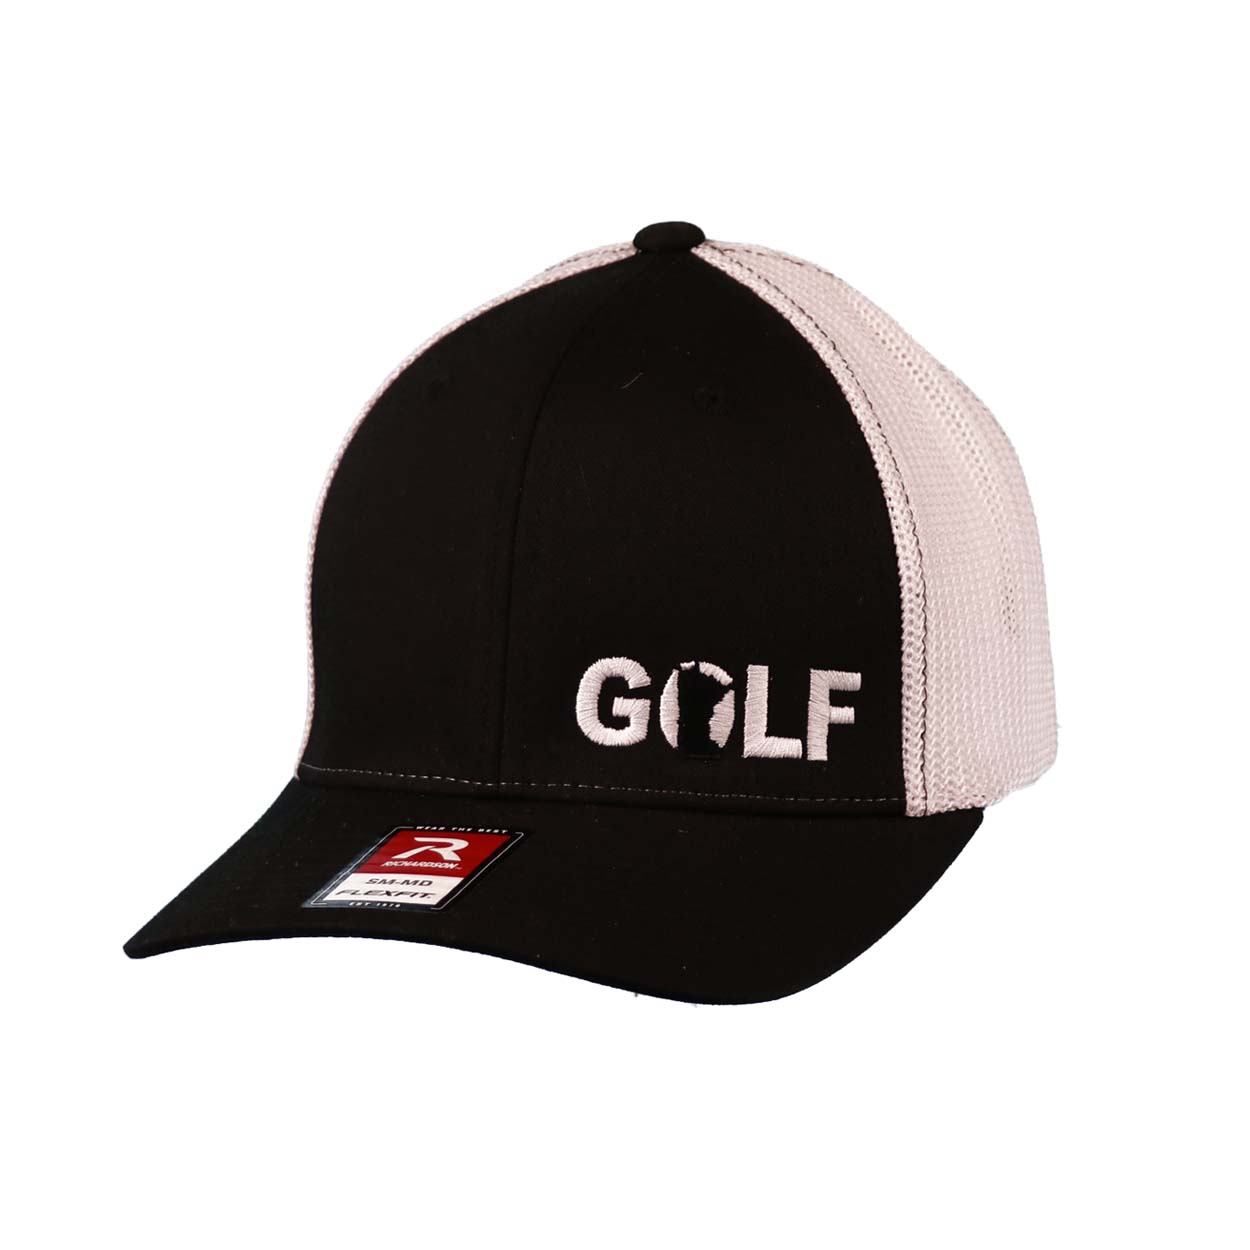 Golf Minnesota Night Out Embroidered Flex Fit Hat Black/White